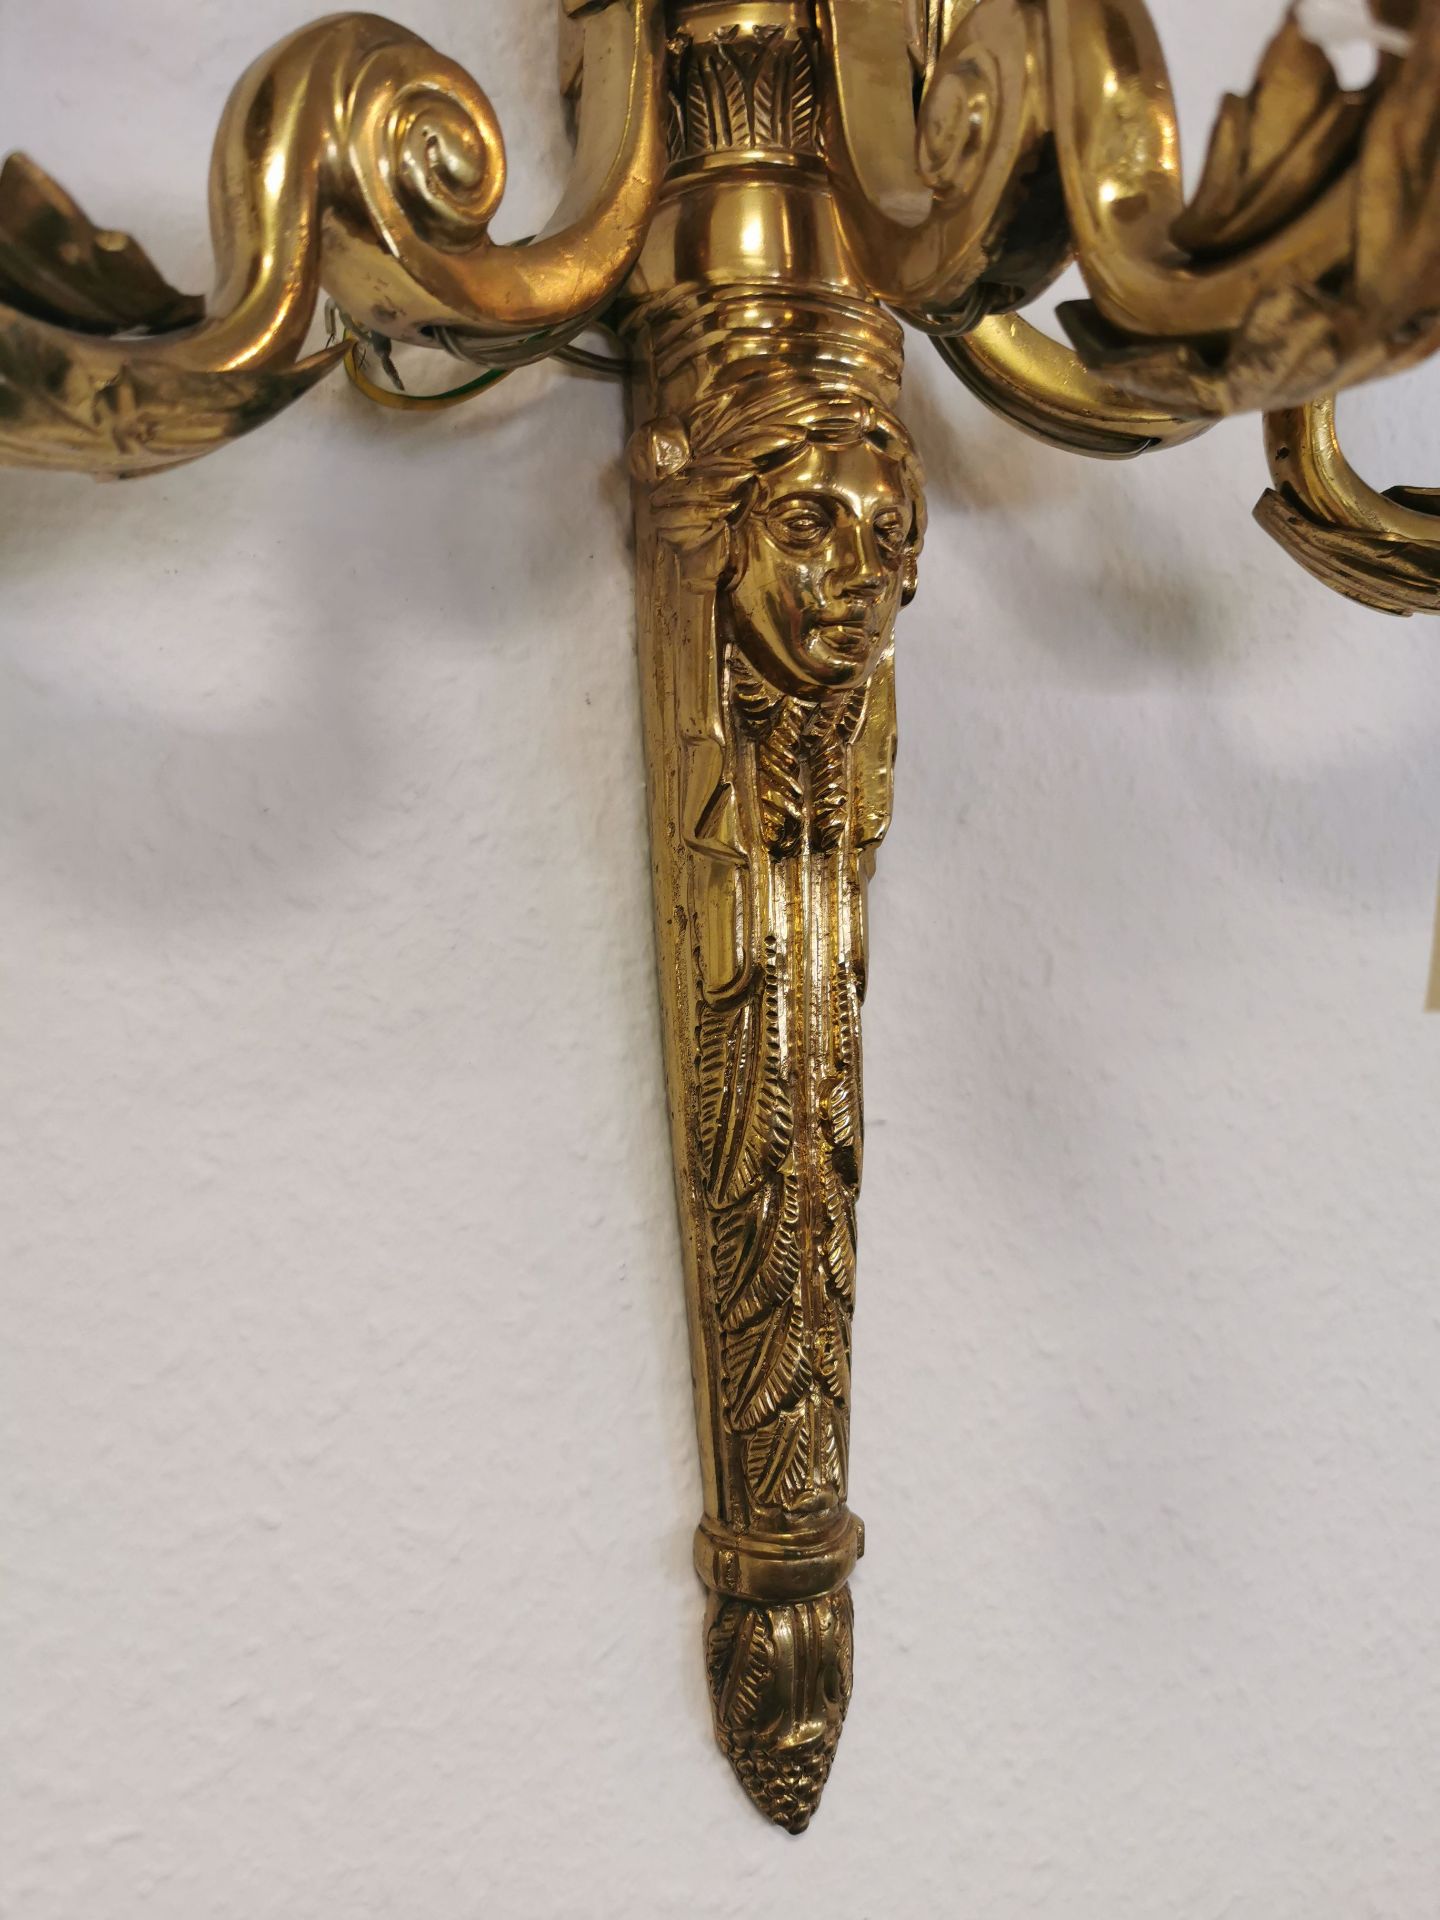 2 SPLENDID THREE-LIGHT SCONCES IN THE FORMAL LANGUAGE OF THE EMPIRE - Image 2 of 4